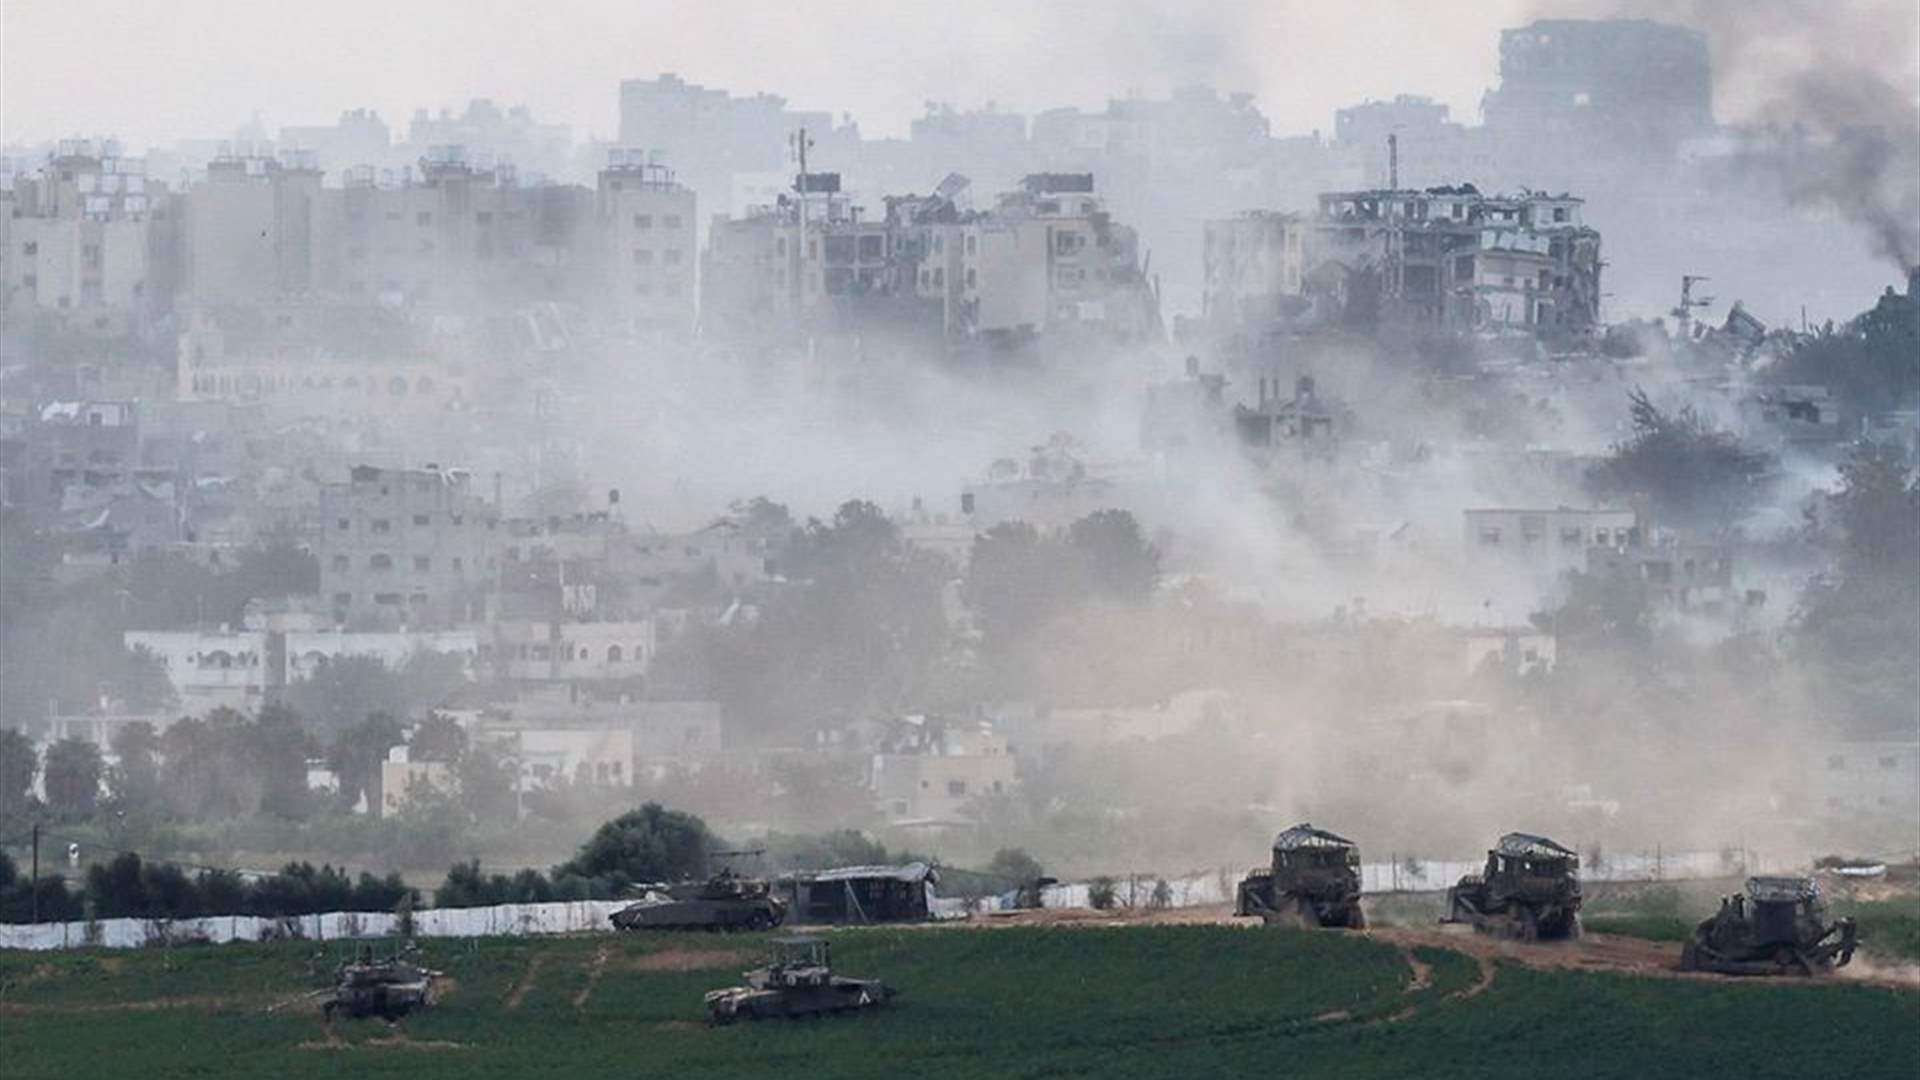 Intensifying clashes: Israel launches new phase of conflict in Gaza